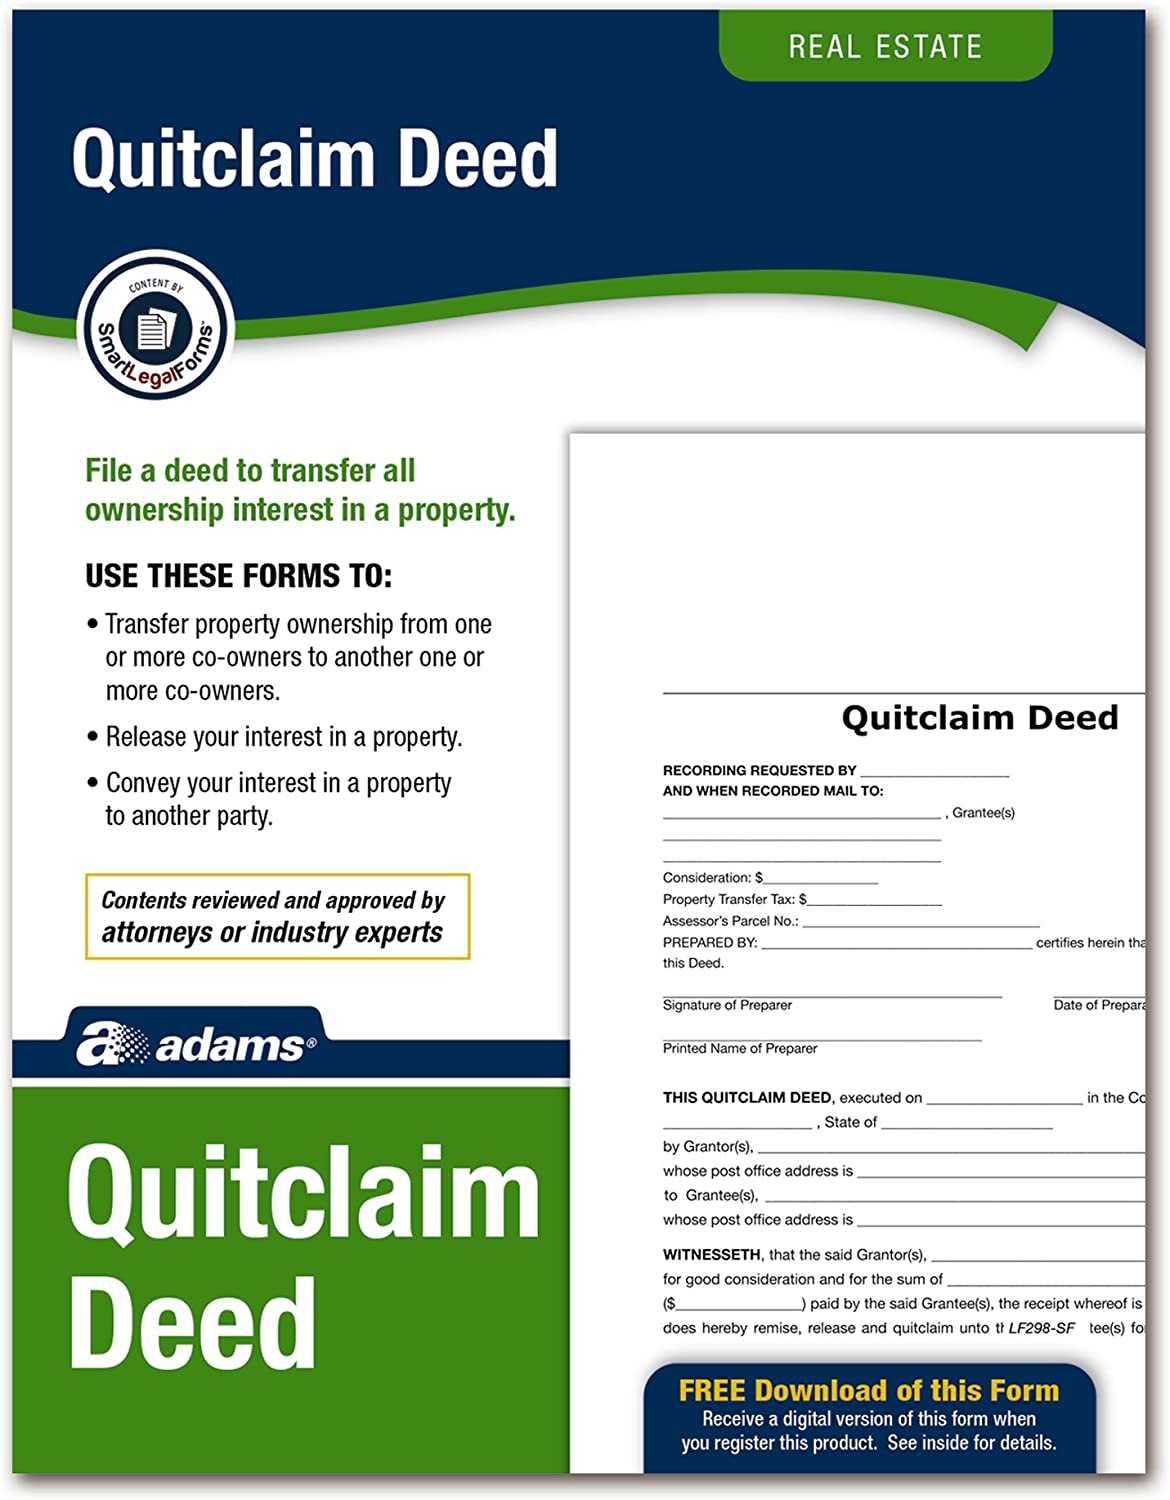 Adams Quitclaim Deed\ Forms and Instructions (LF298) \ White